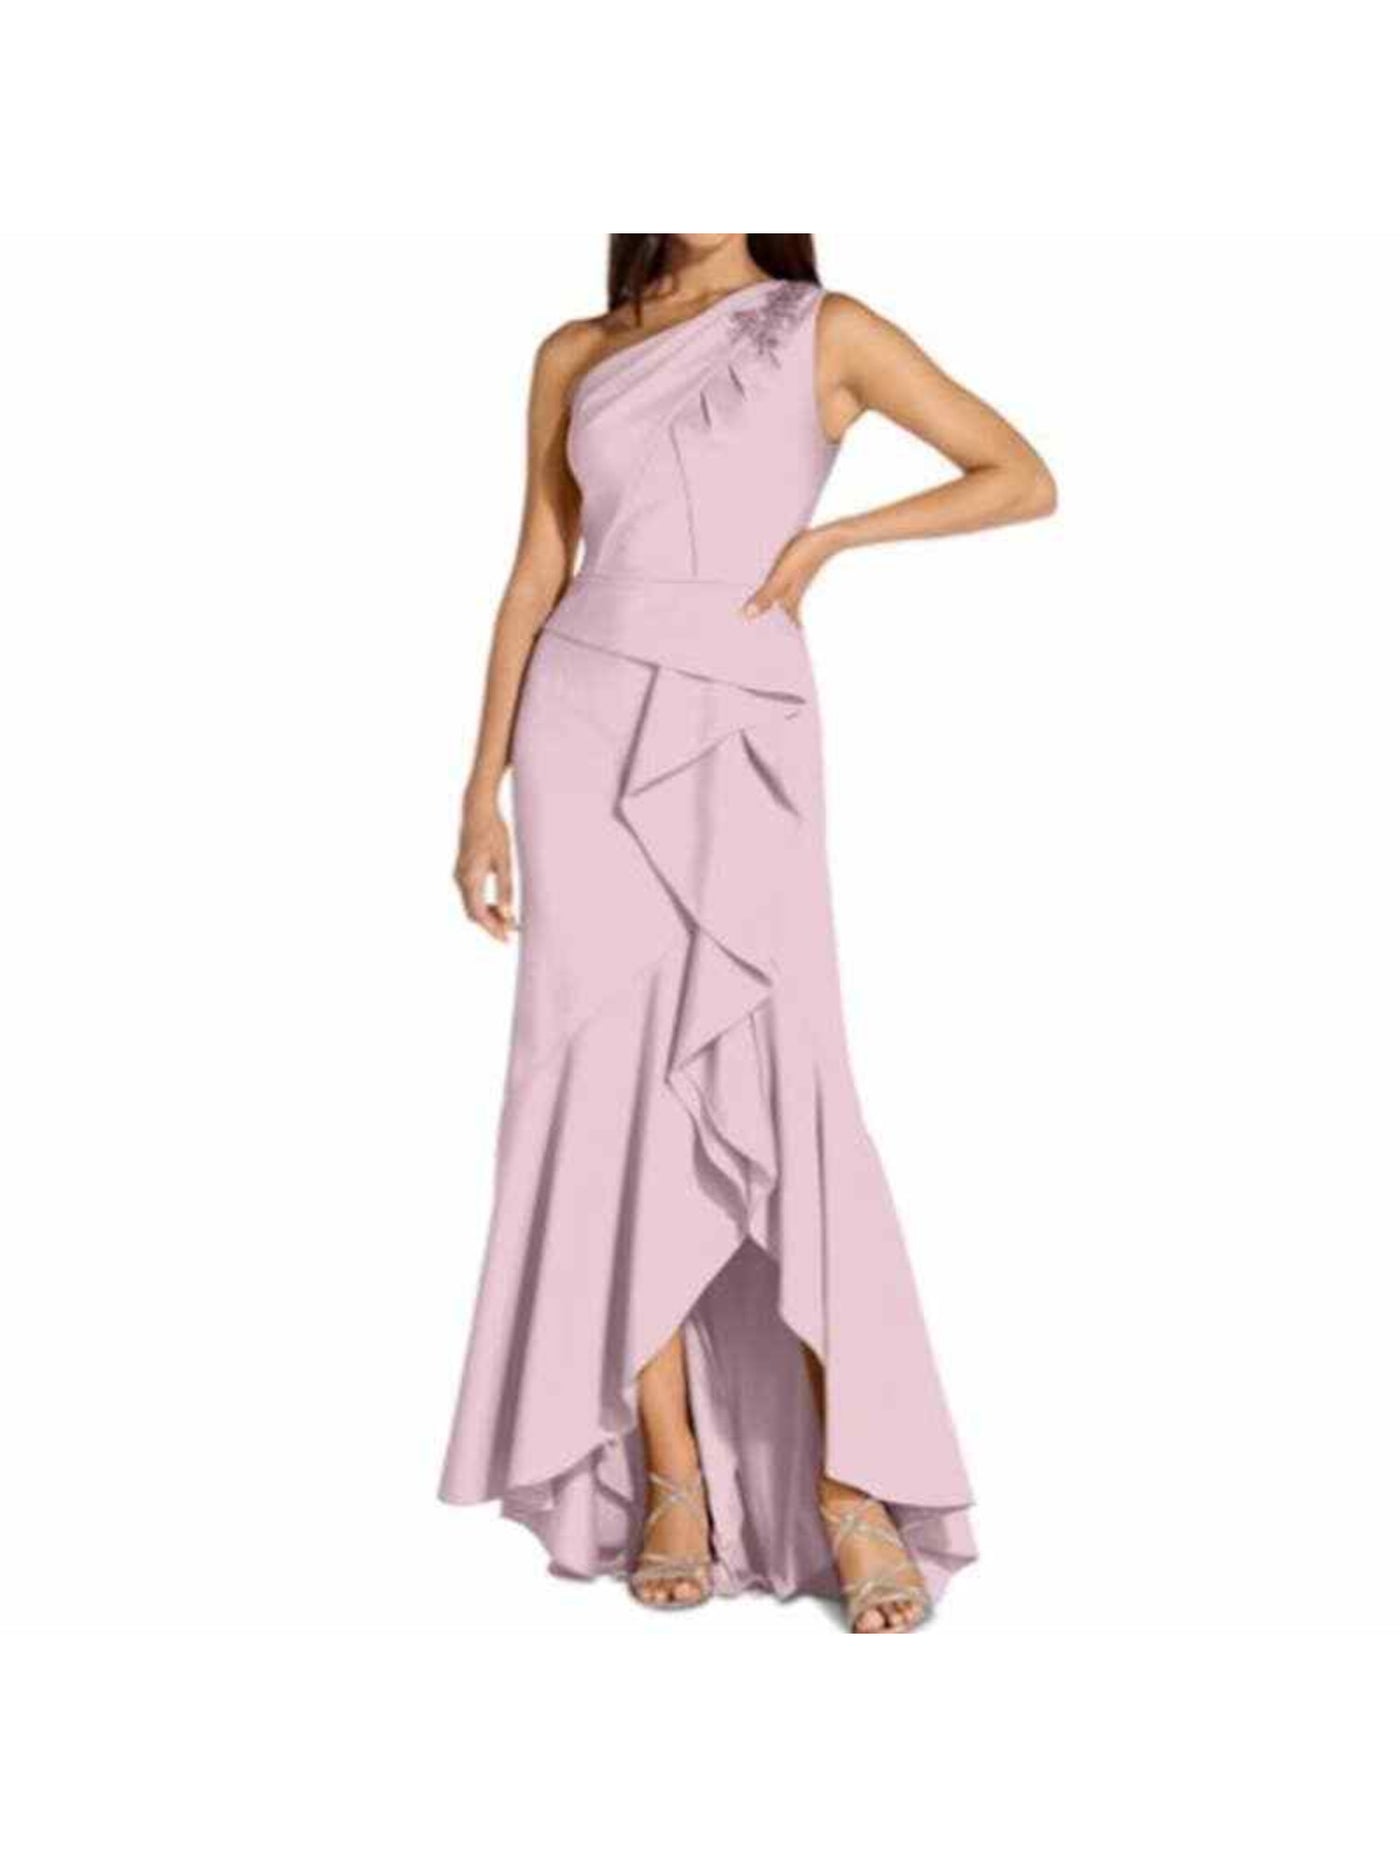 ADRIANNA PAPELL Womens Pink Stretch Beaded Zippered Pleated Ruffled Lined Sleeveless Asymmetrical Neckline Full-Length Evening Gown Dress 2